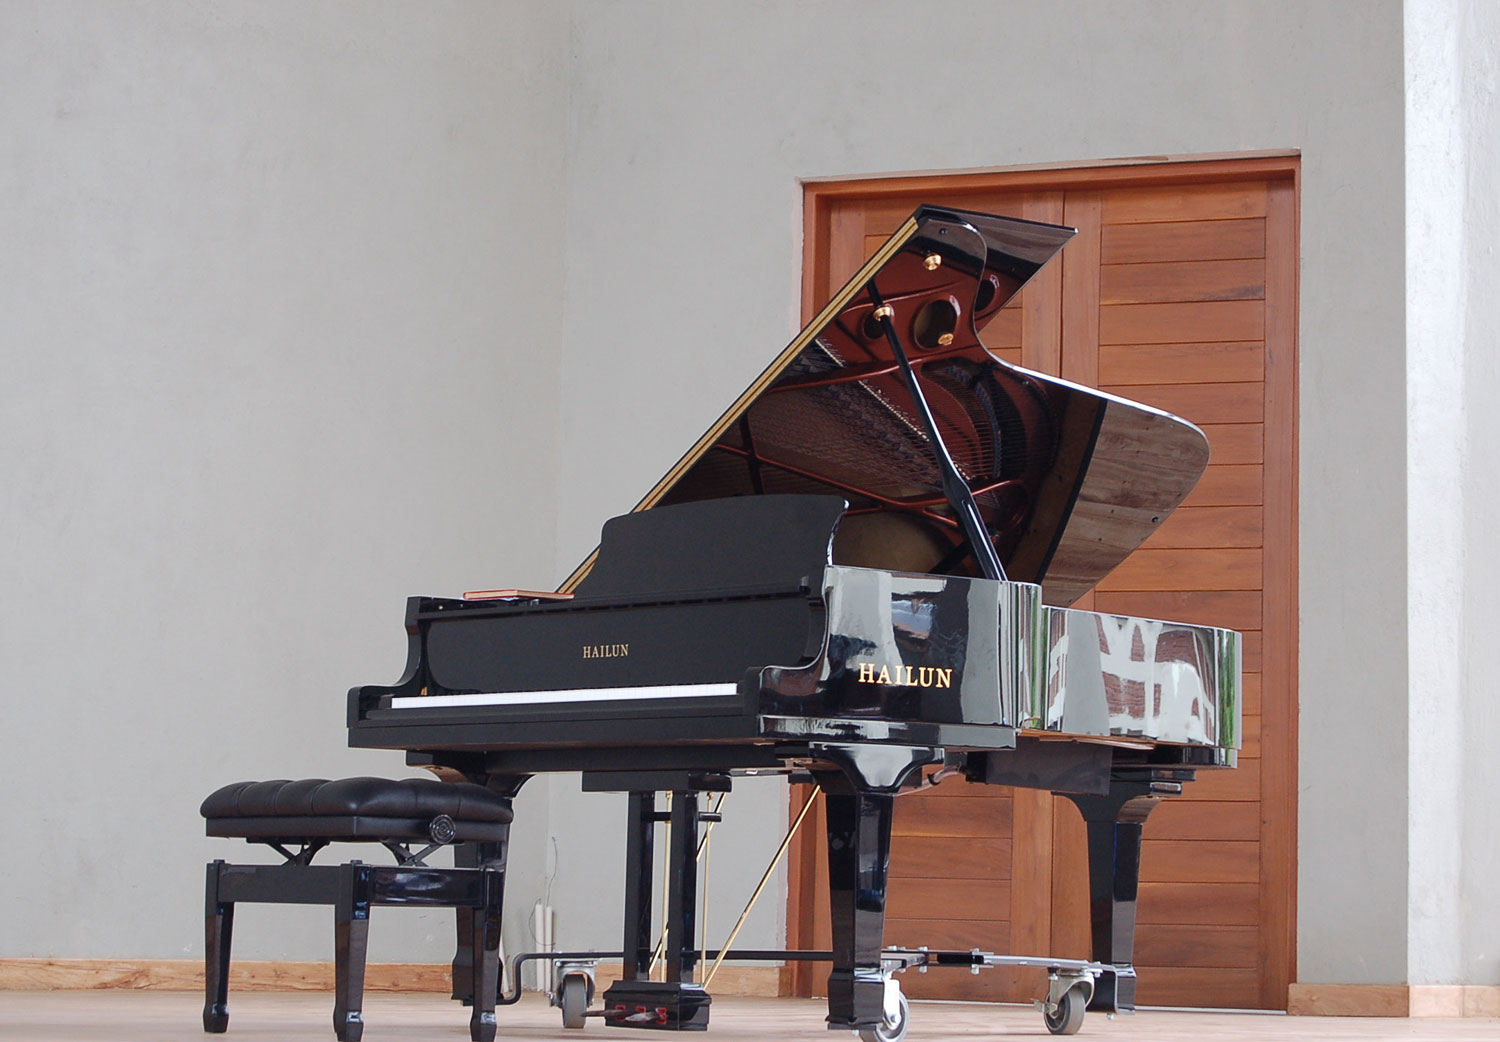  This concert grand piano is probably the third in a university in Africa, and was donated to Tumaini University Makumira by friends from the United States of America. Its permanent home is in the Performance Theatre of the CAC. Special thanks to the